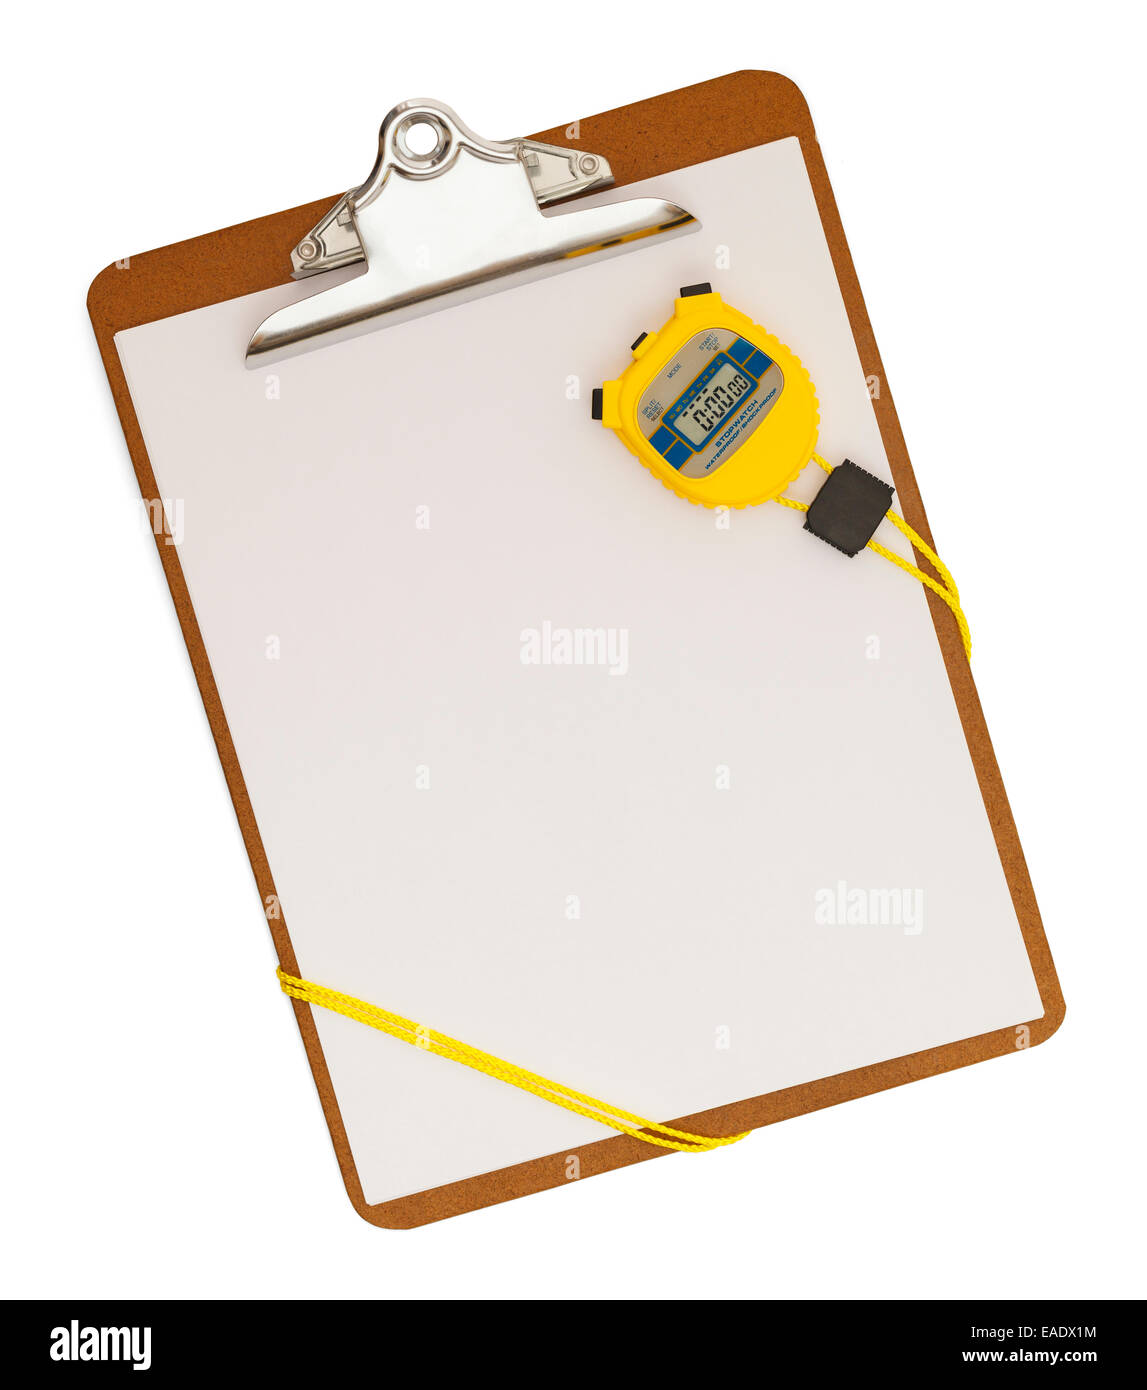 Blank Clipboard with Stop Watch on Isolated White Background. Stock Photo